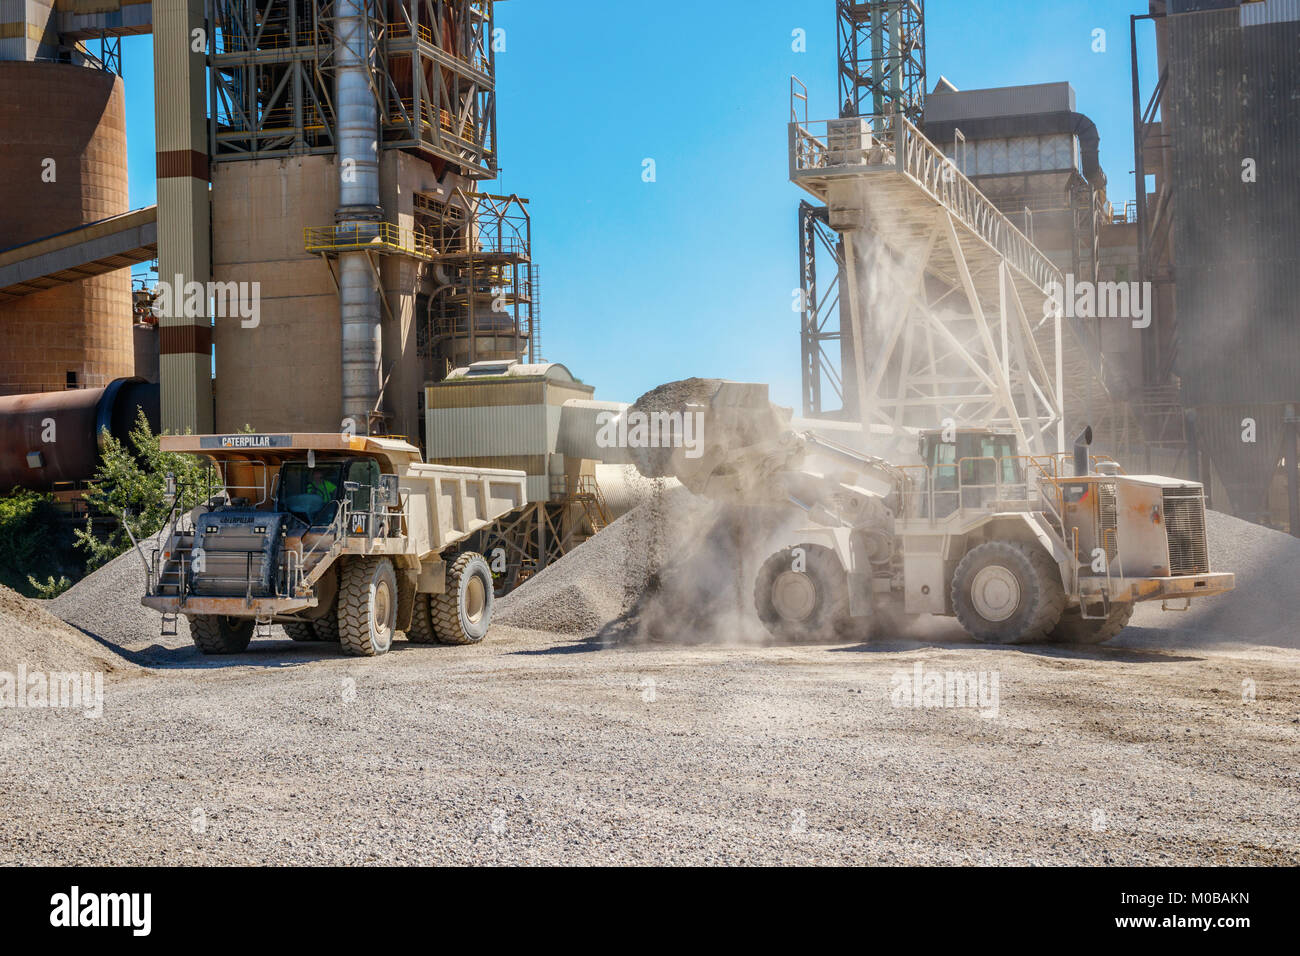 Wheel loader fills a Caterpiller dump truck with marl at the Mount Saint Peter ENCI (First Dutch Cement Industry) quarry, Maastricht, The Netherlands. Stock Photo